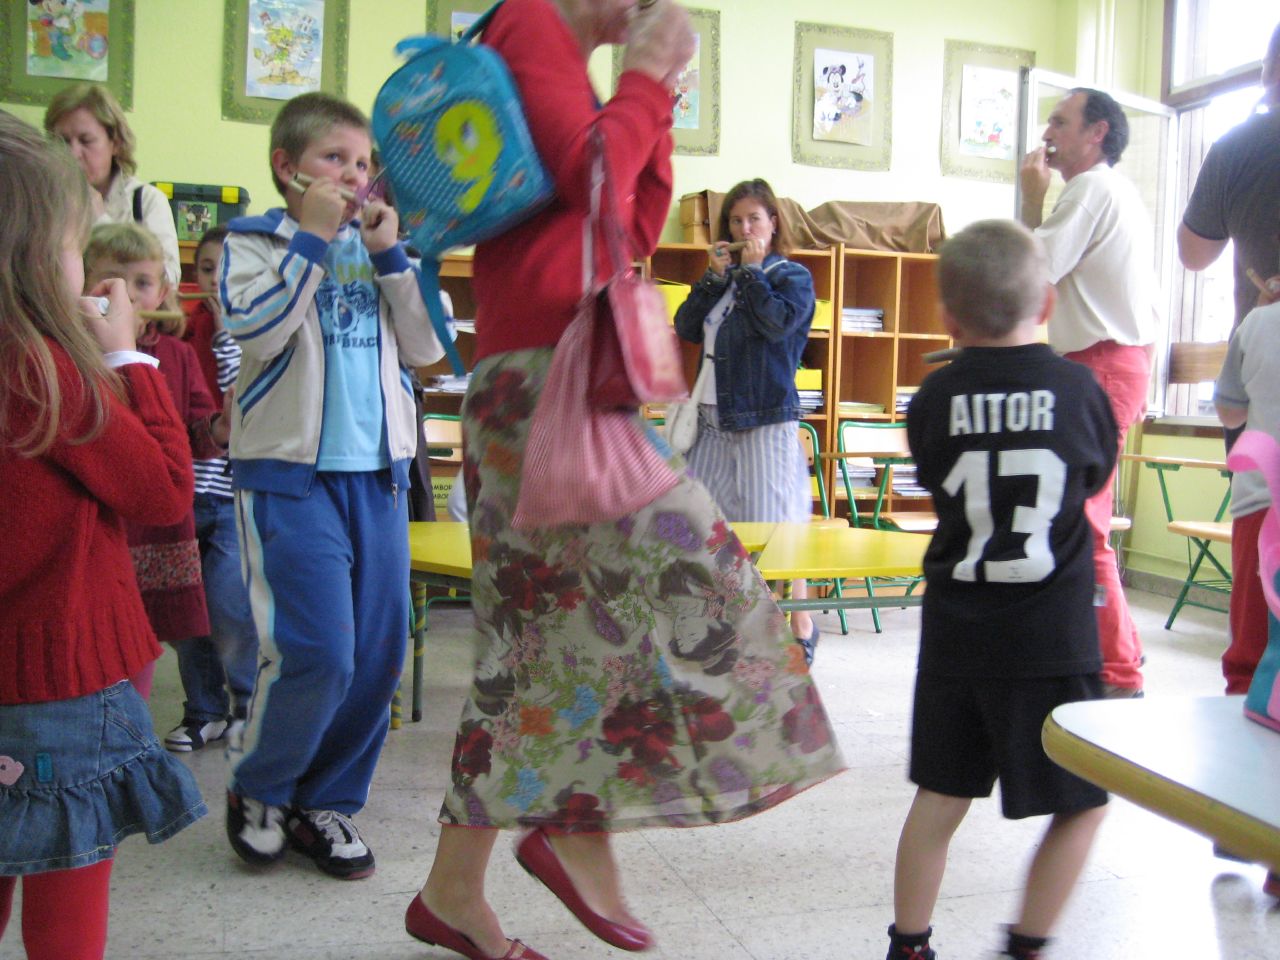 children and an adult watching a group of people with bags